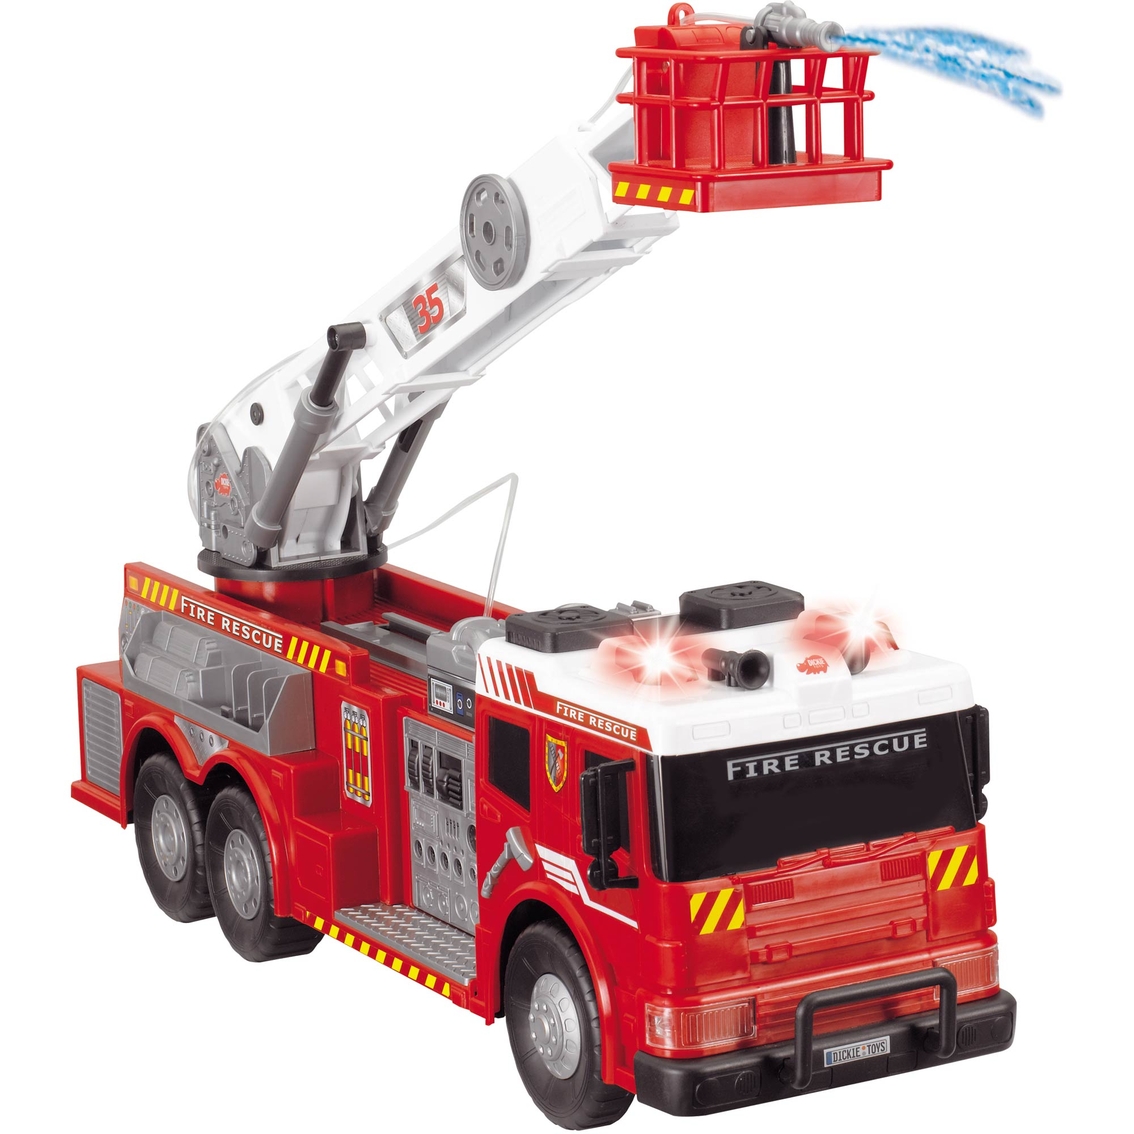 Dickie Fire Rescue Brigade - Image 2 of 4